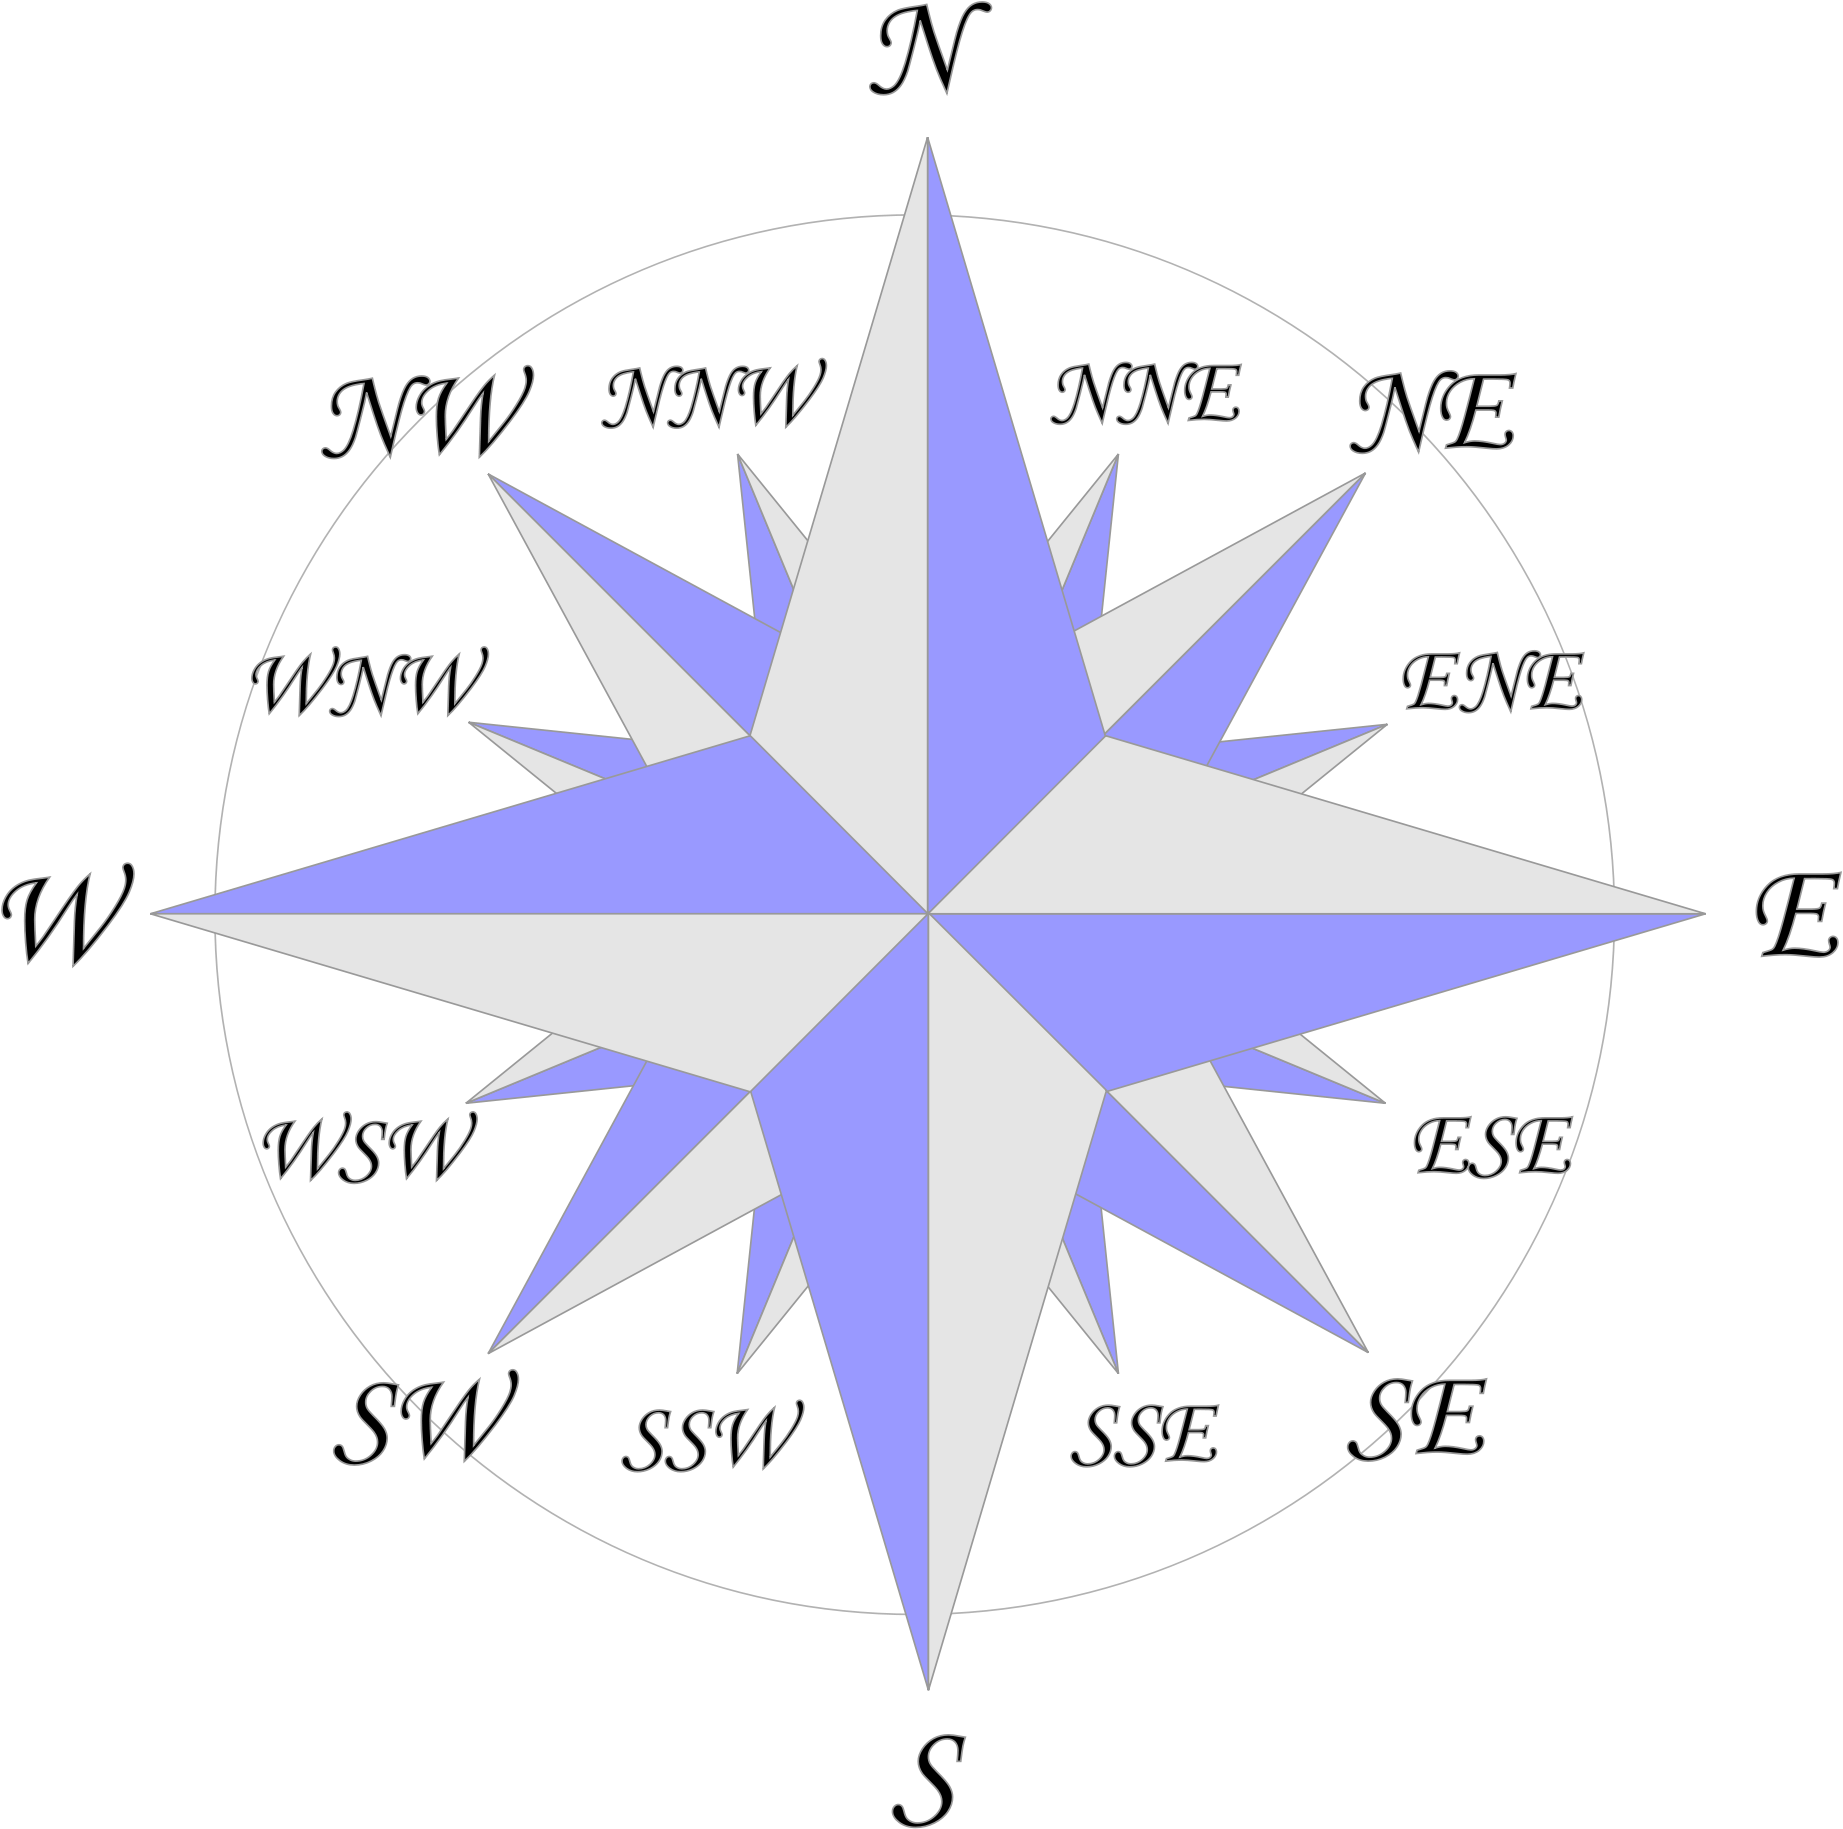 Open - Compass Rose 16 Points (2000x2000)